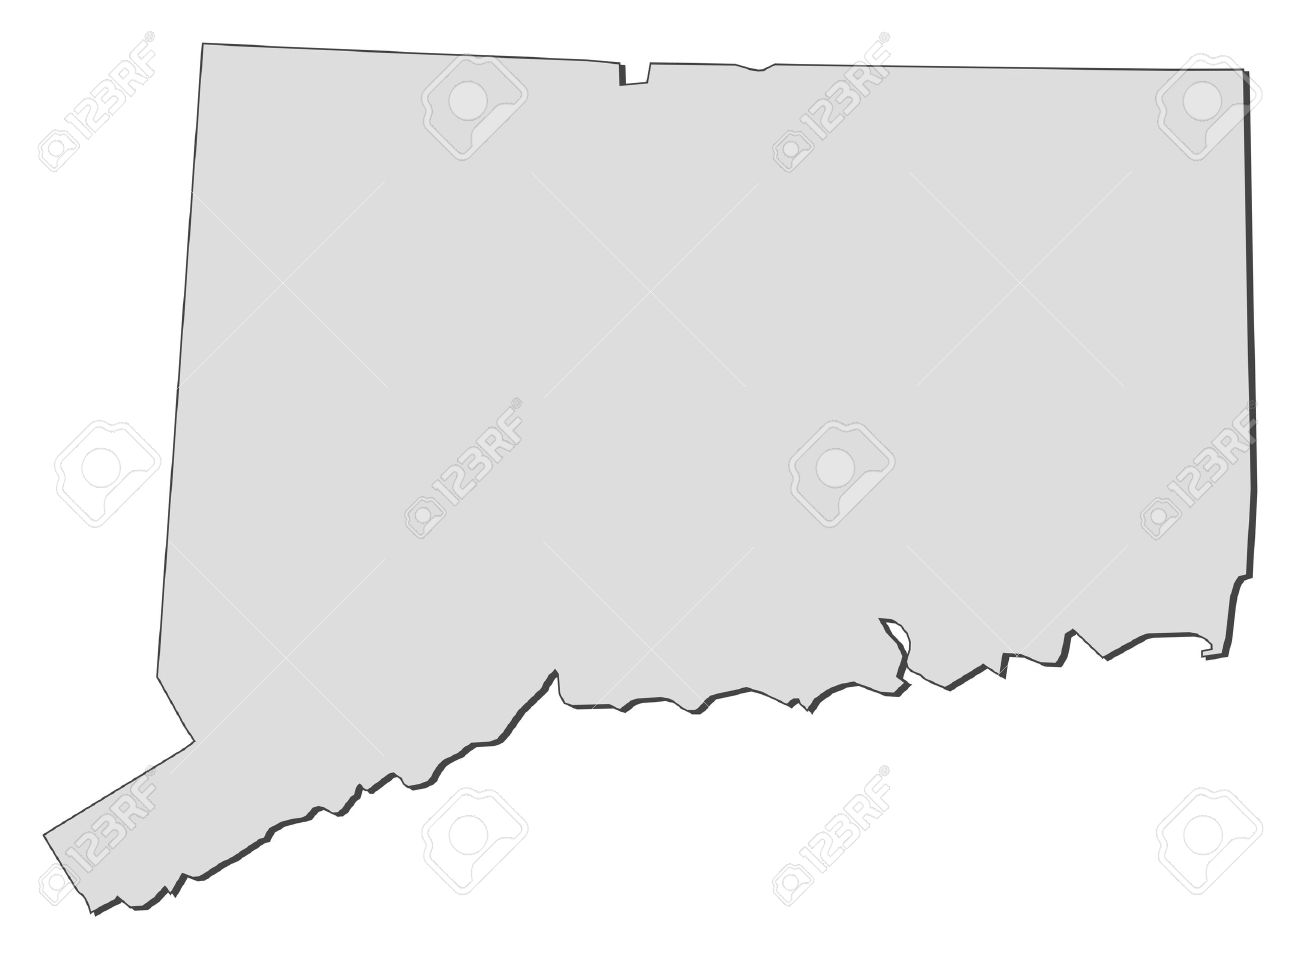 14368574-Map-of-Connecticut-a-state-of-United-States--Stock-Vector.jpg